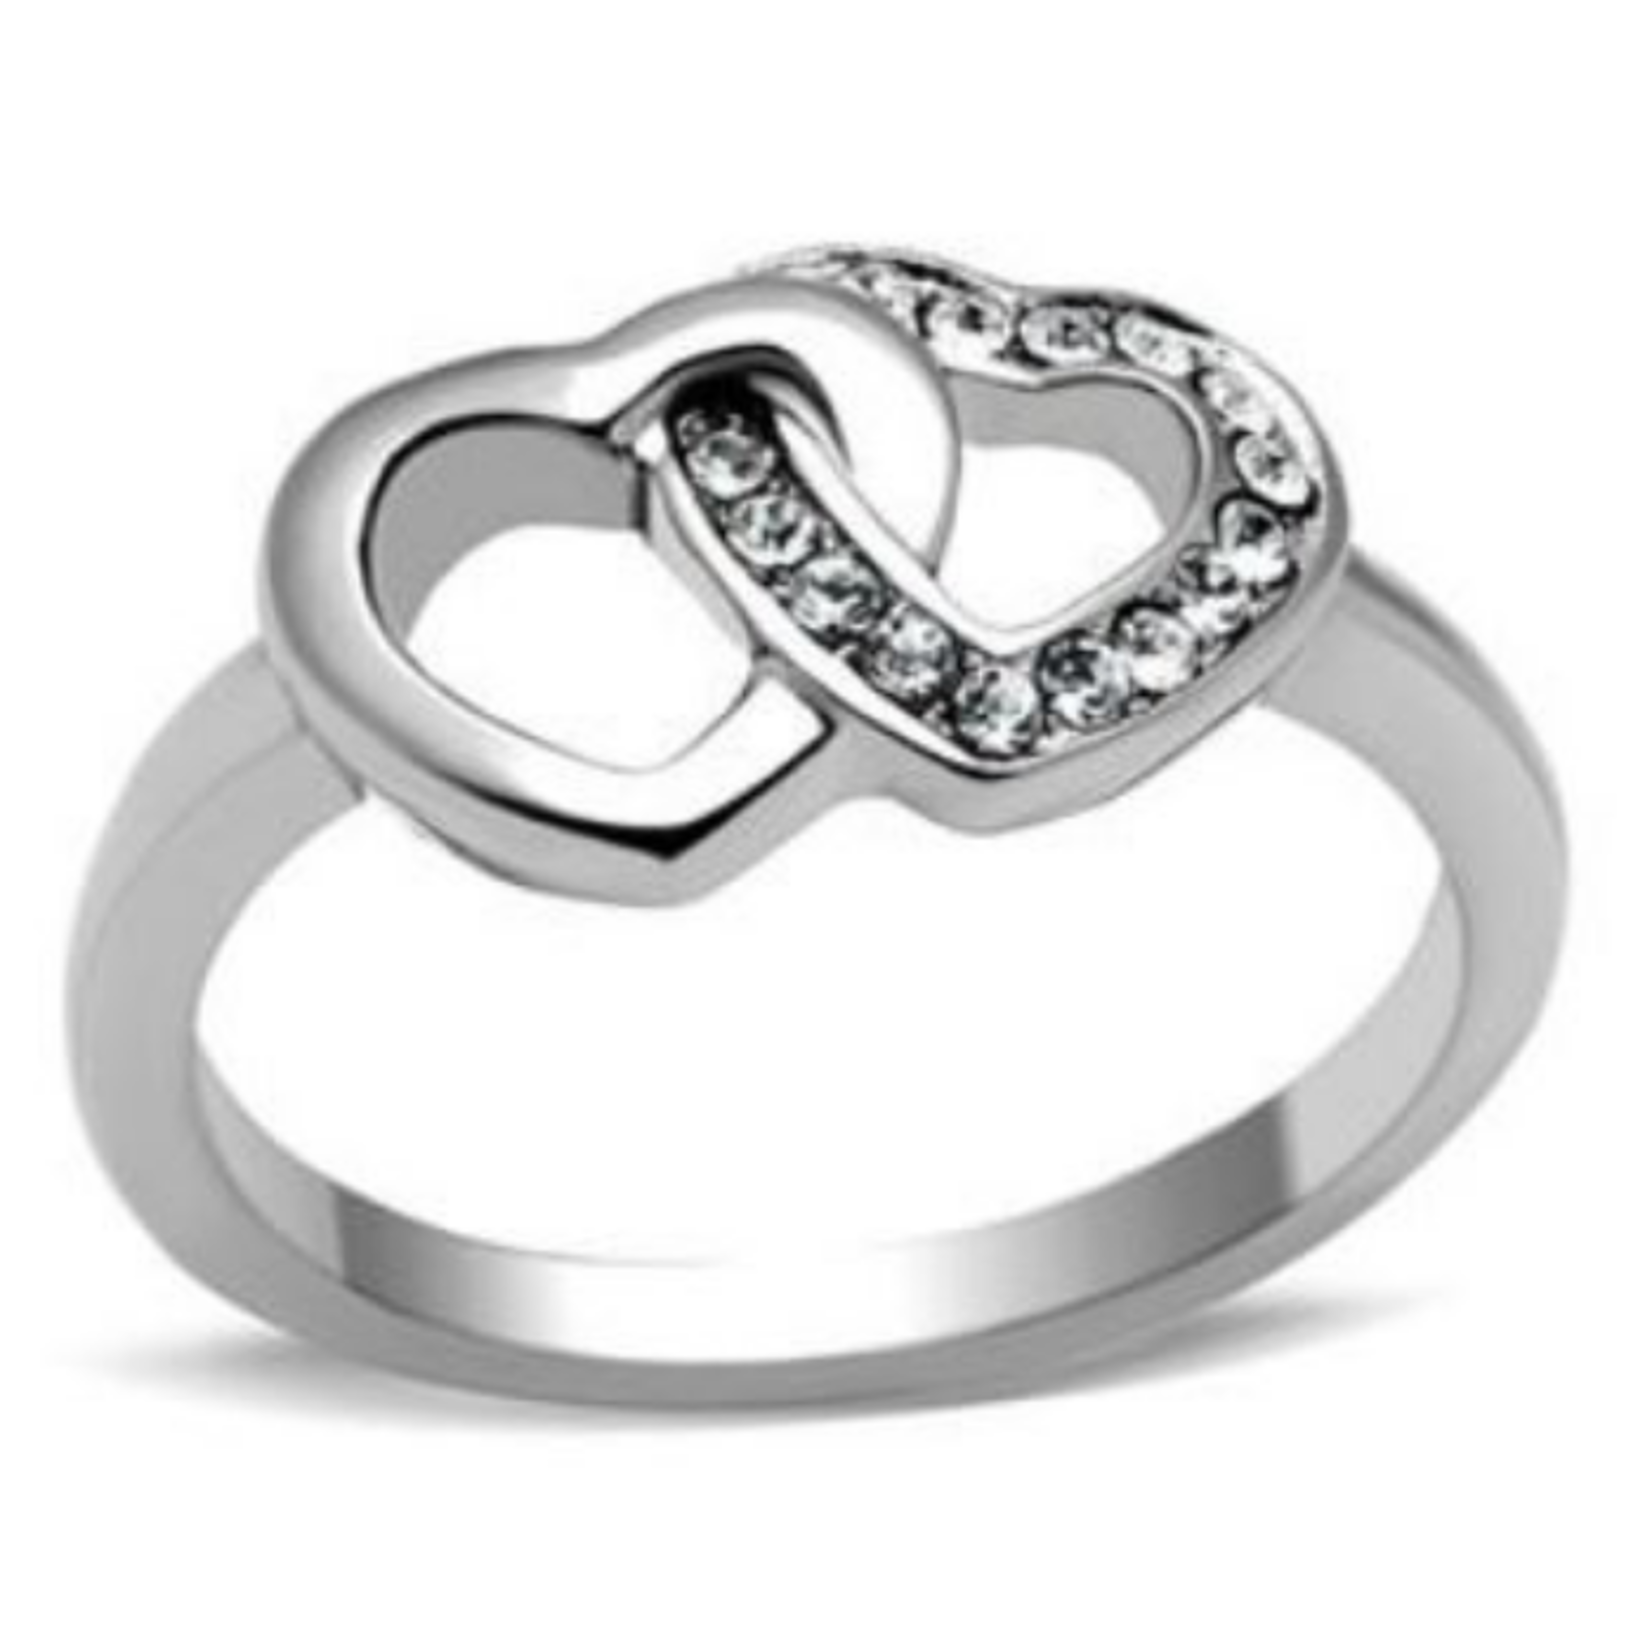 ROS Intertwined Heart Ring